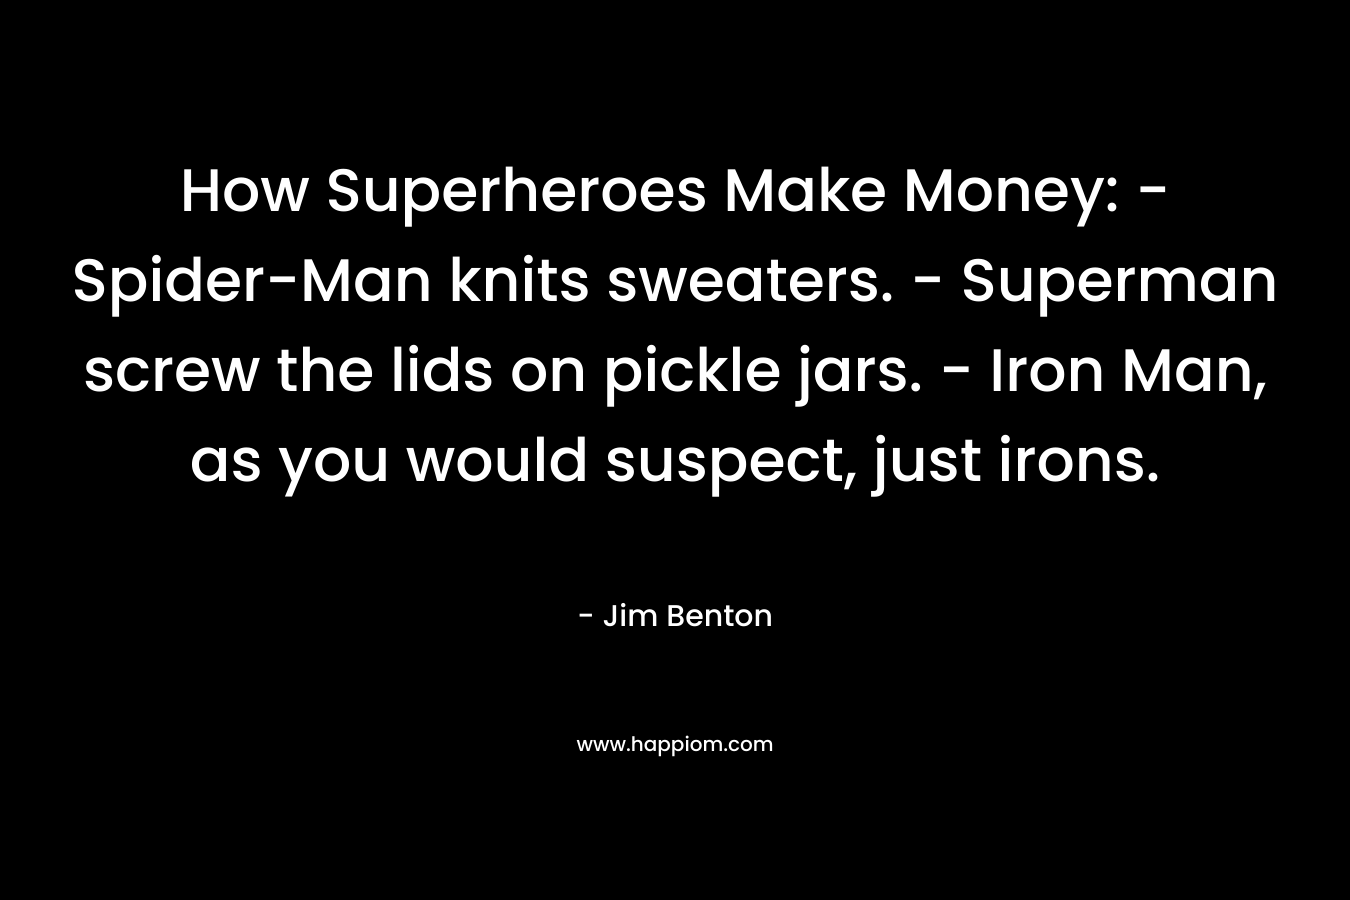 How Superheroes Make Money: – Spider-Man knits sweaters. – Superman screw the lids on pickle jars. – Iron Man, as you would suspect, just irons. – Jim Benton